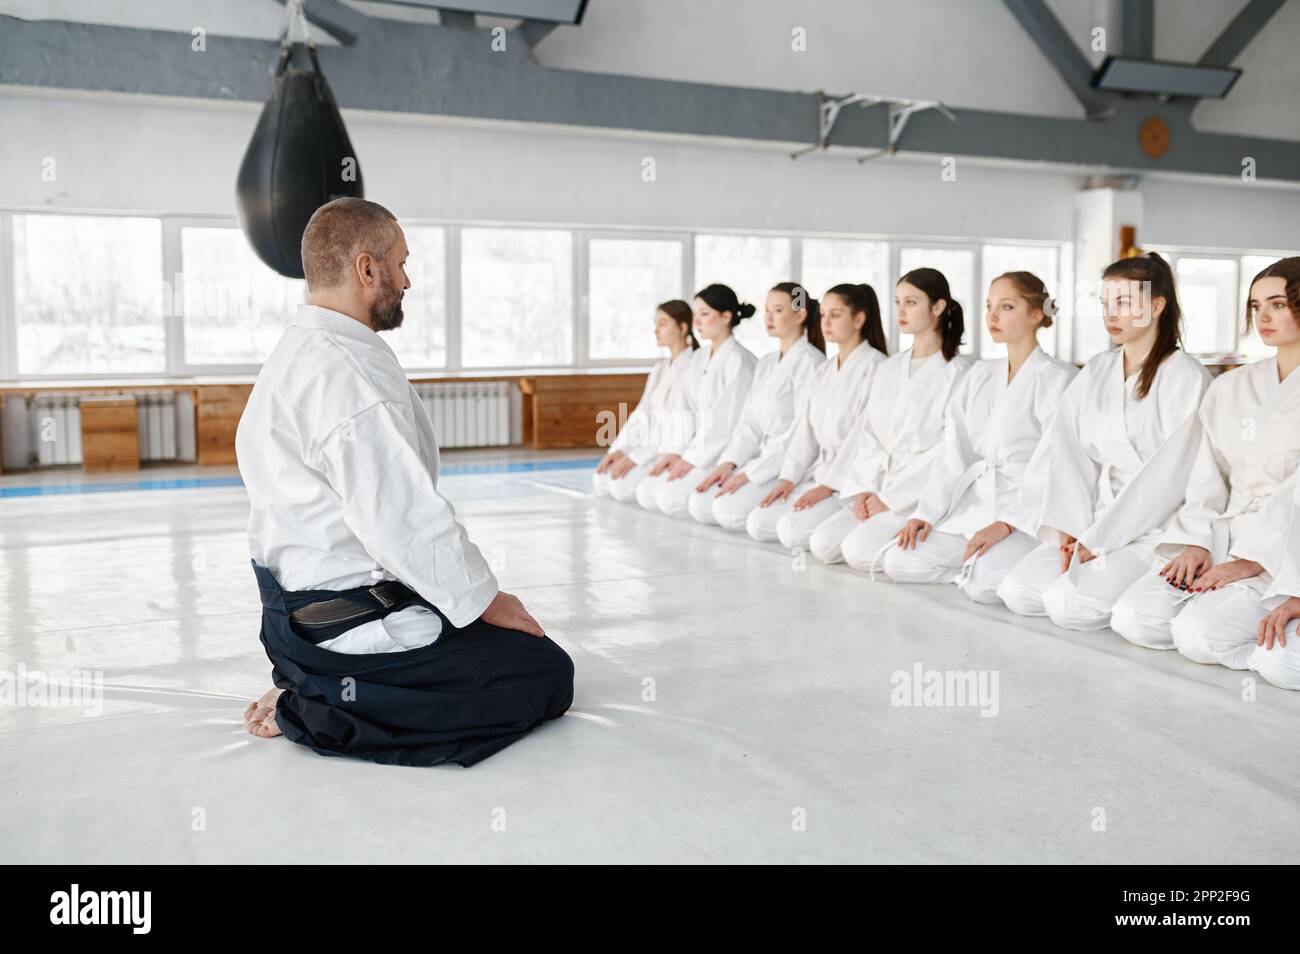 Aikido master sitting on floor front of row of young female students Stock Photo